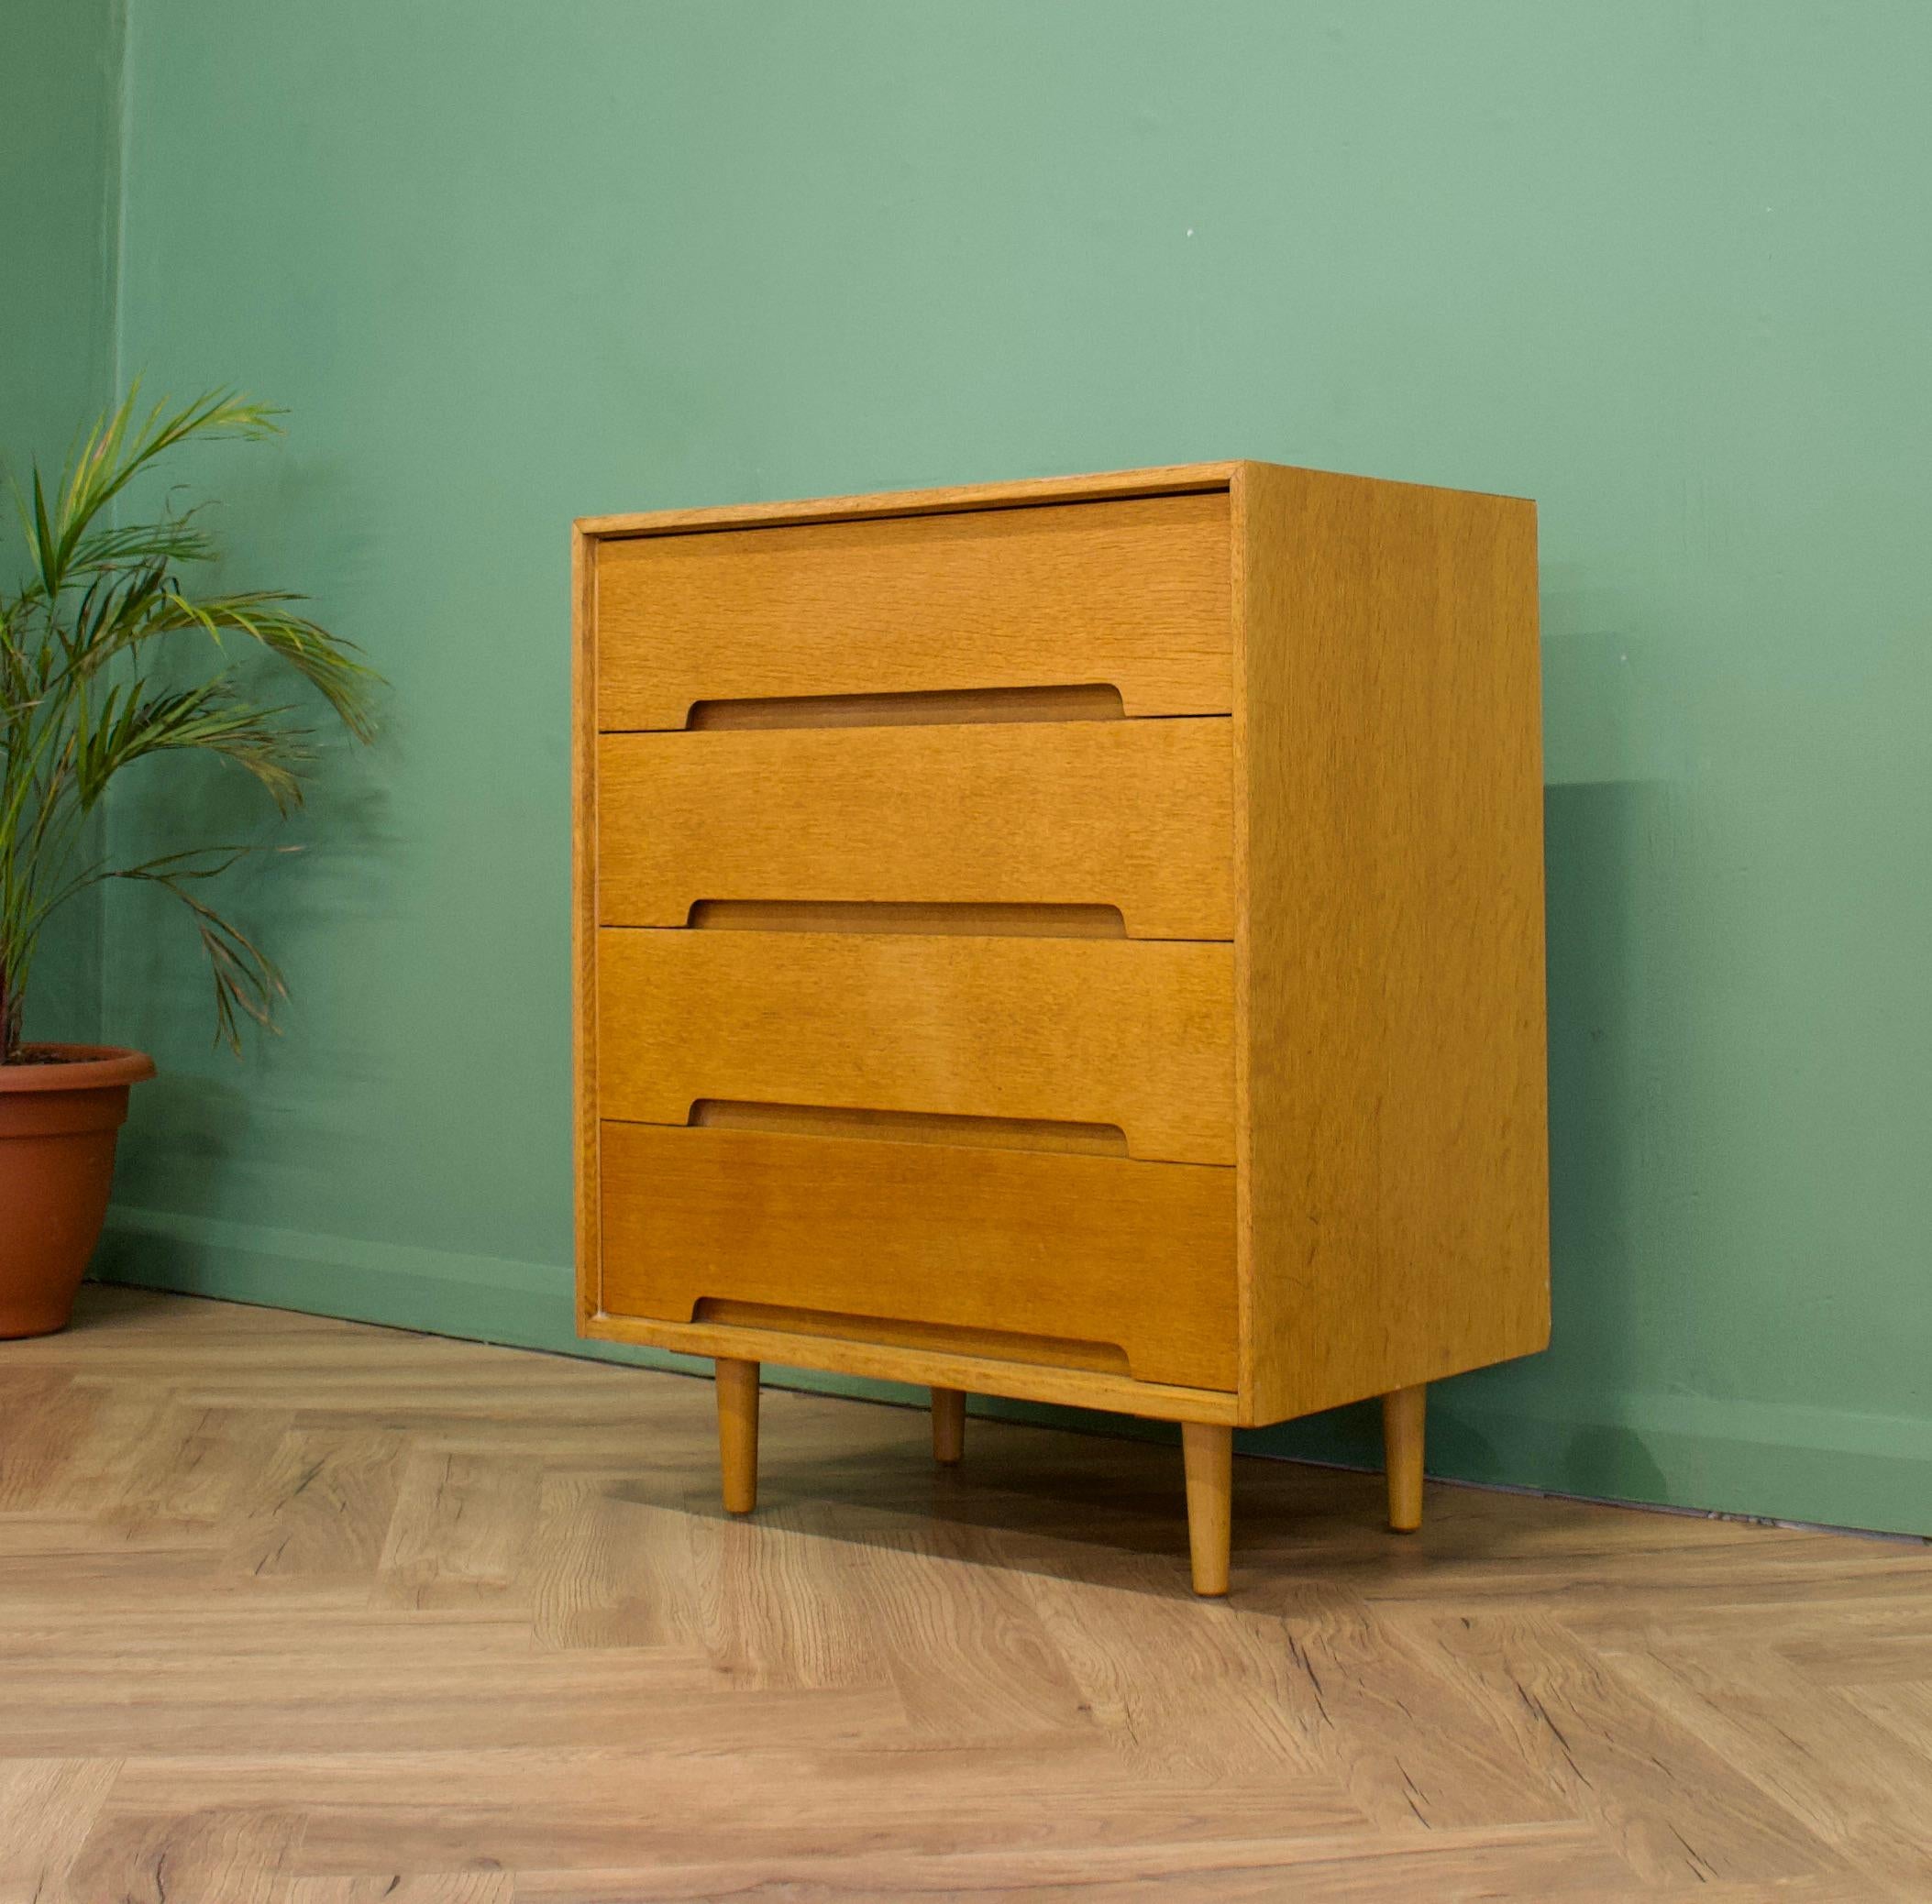 British Midcentury Oak Chest of Drawers by John & Sylvia Reid for Stag, 1950s